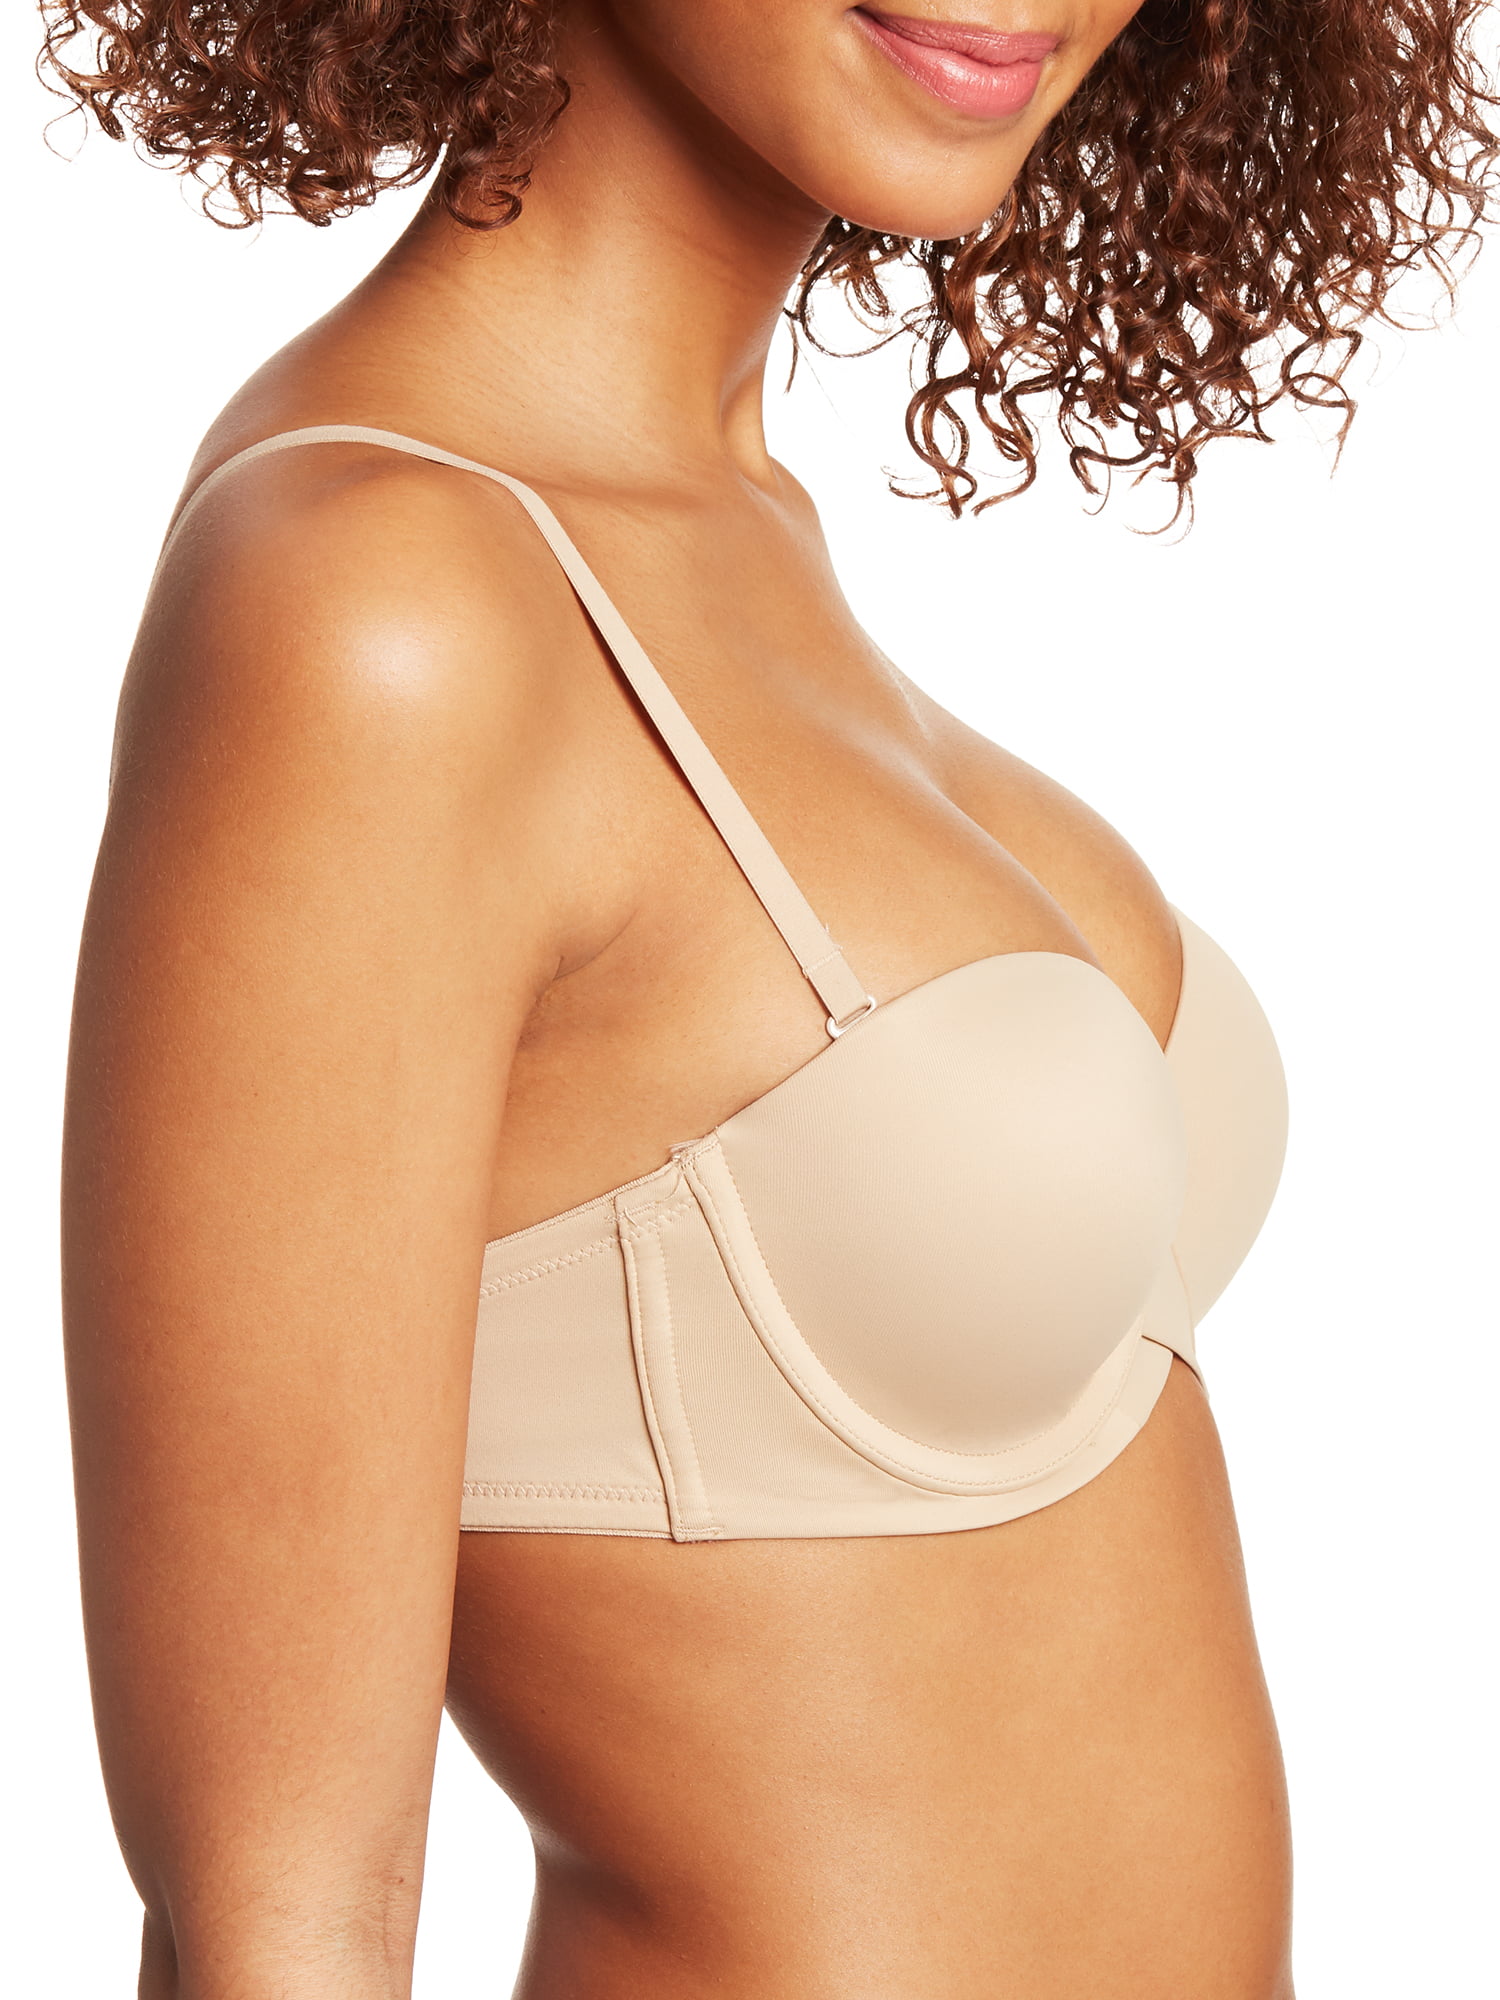 Maidenform Sweet Nothings Push Up Wing Bra (1 unit), Delivery Near You